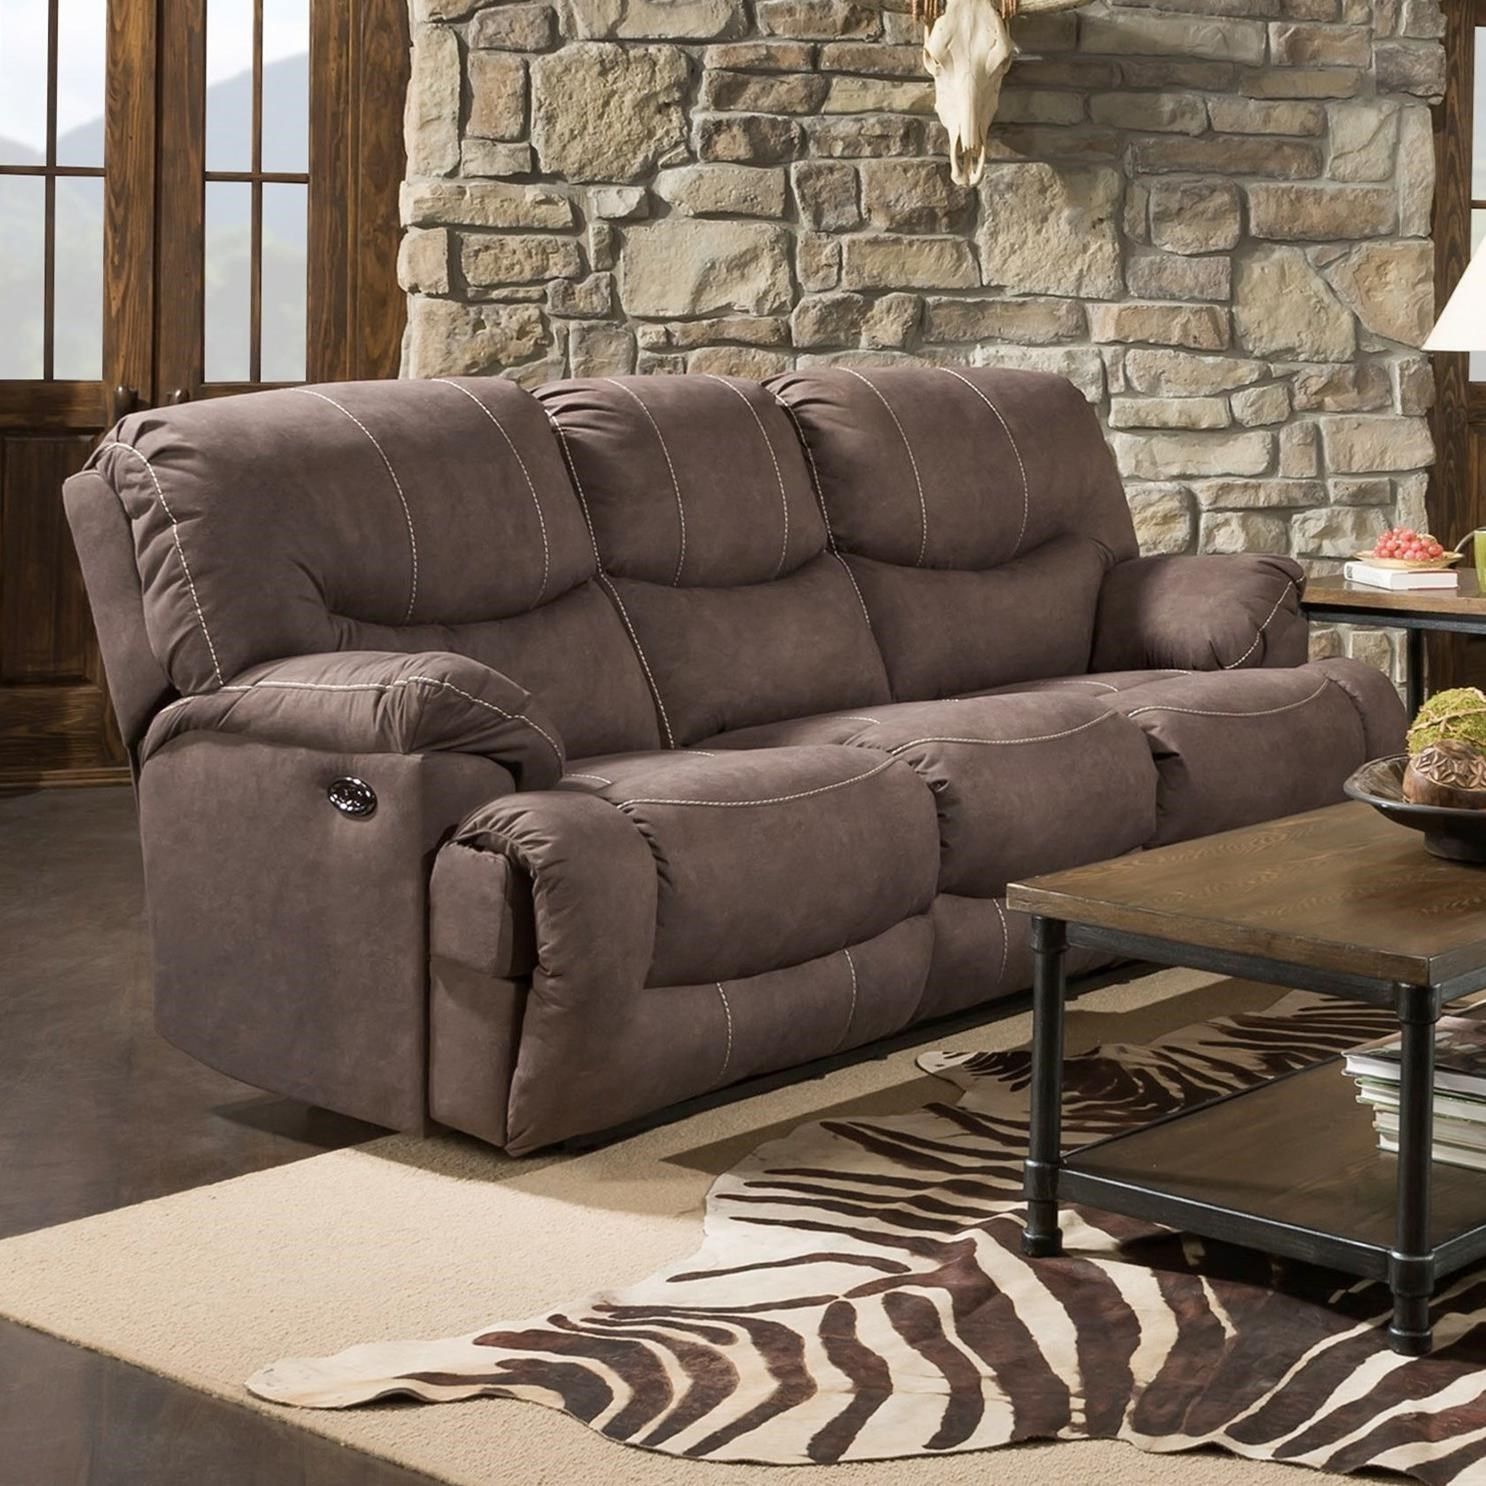 United Furniture Industries 50455br Casual Double Power Regarding Lannister Dual Power Reclining Sofas (View 4 of 12)